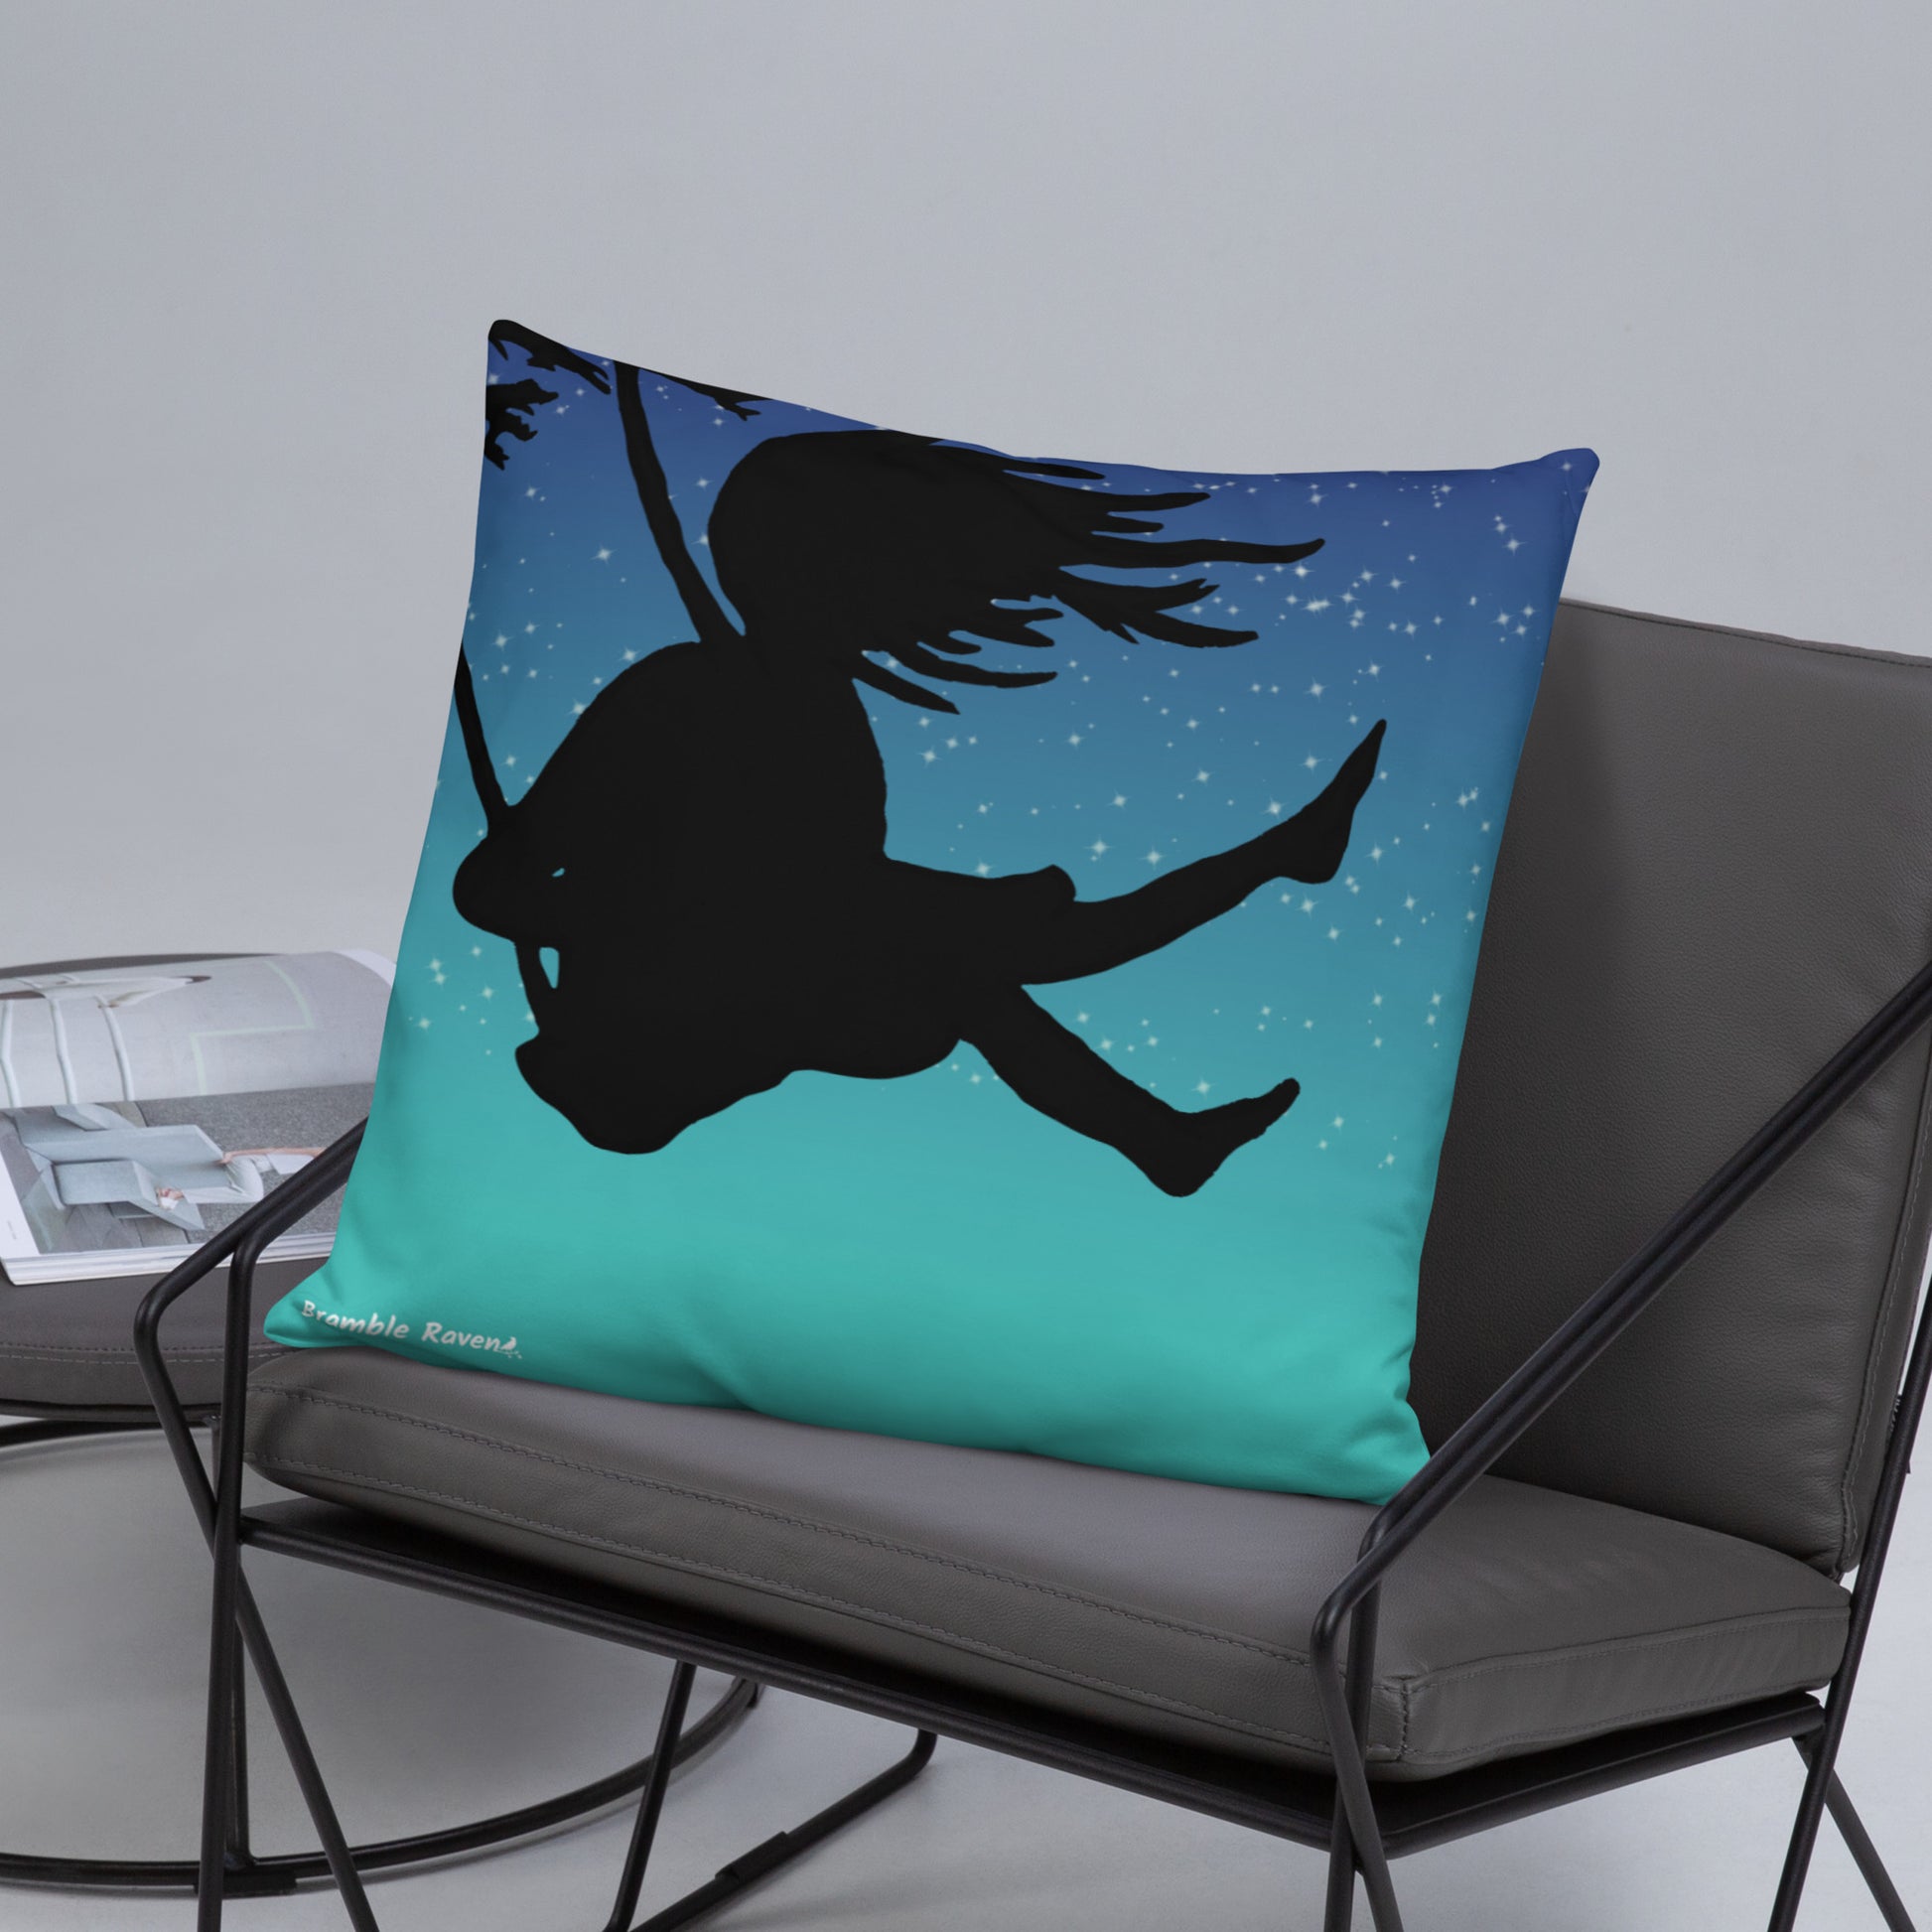 Original Swing Free design of a girl's silhouette in a tree swing against the backdrop of a blue starry sky. Rectangular image on front of pillow with blue background fabric. Pillow has design on both sides. 22 by 22 inch accent pillow. Enlarged back image shown on grey chair.